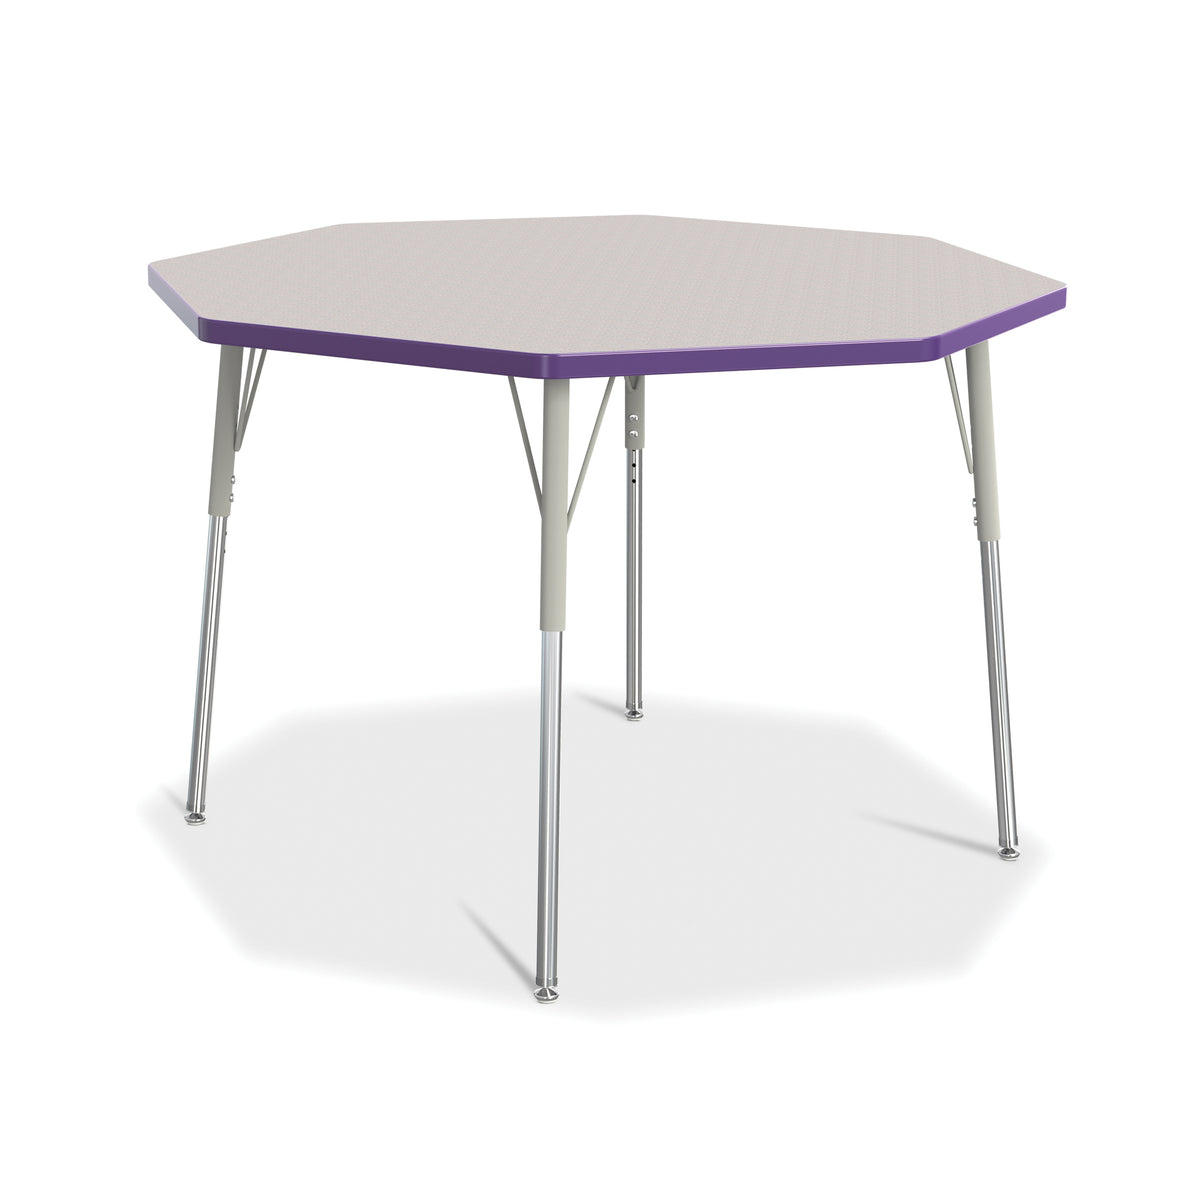 6428JCA004, Berries Octagon Activity Table - 48" X 48", A-height - Freckled Gray/Purple/Gray